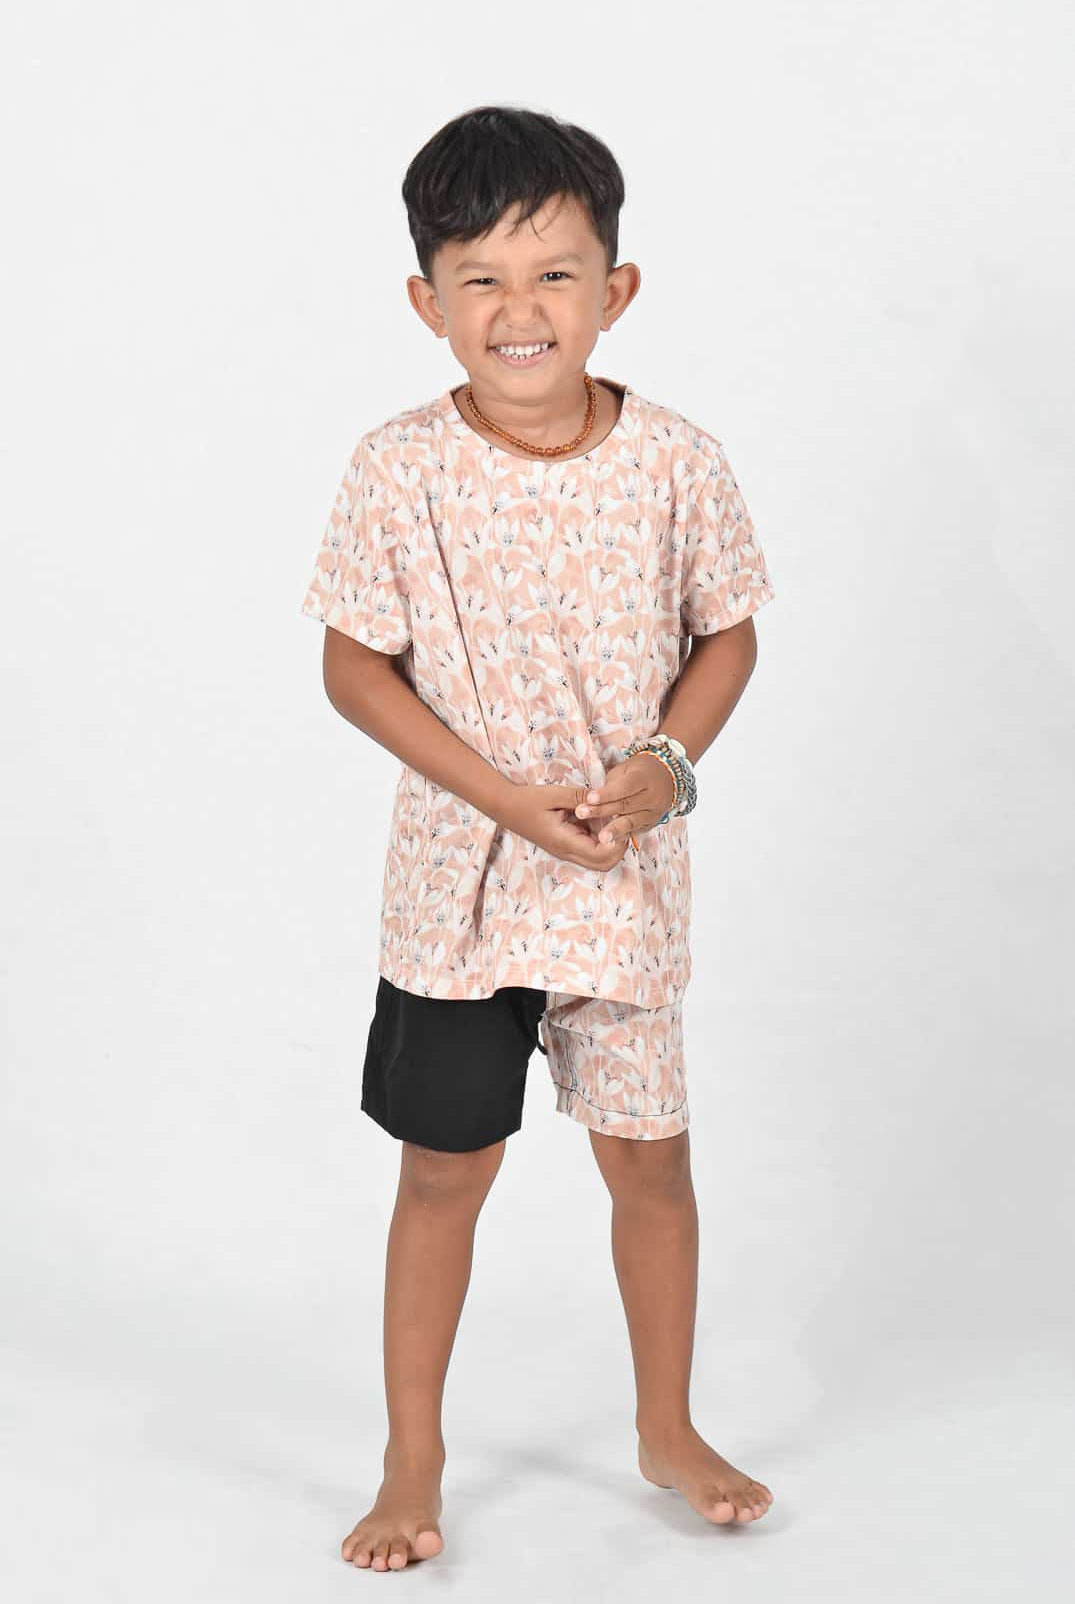 Aina Kids UV shirt in flowers and Lean Boy Boardshorts in black flowers